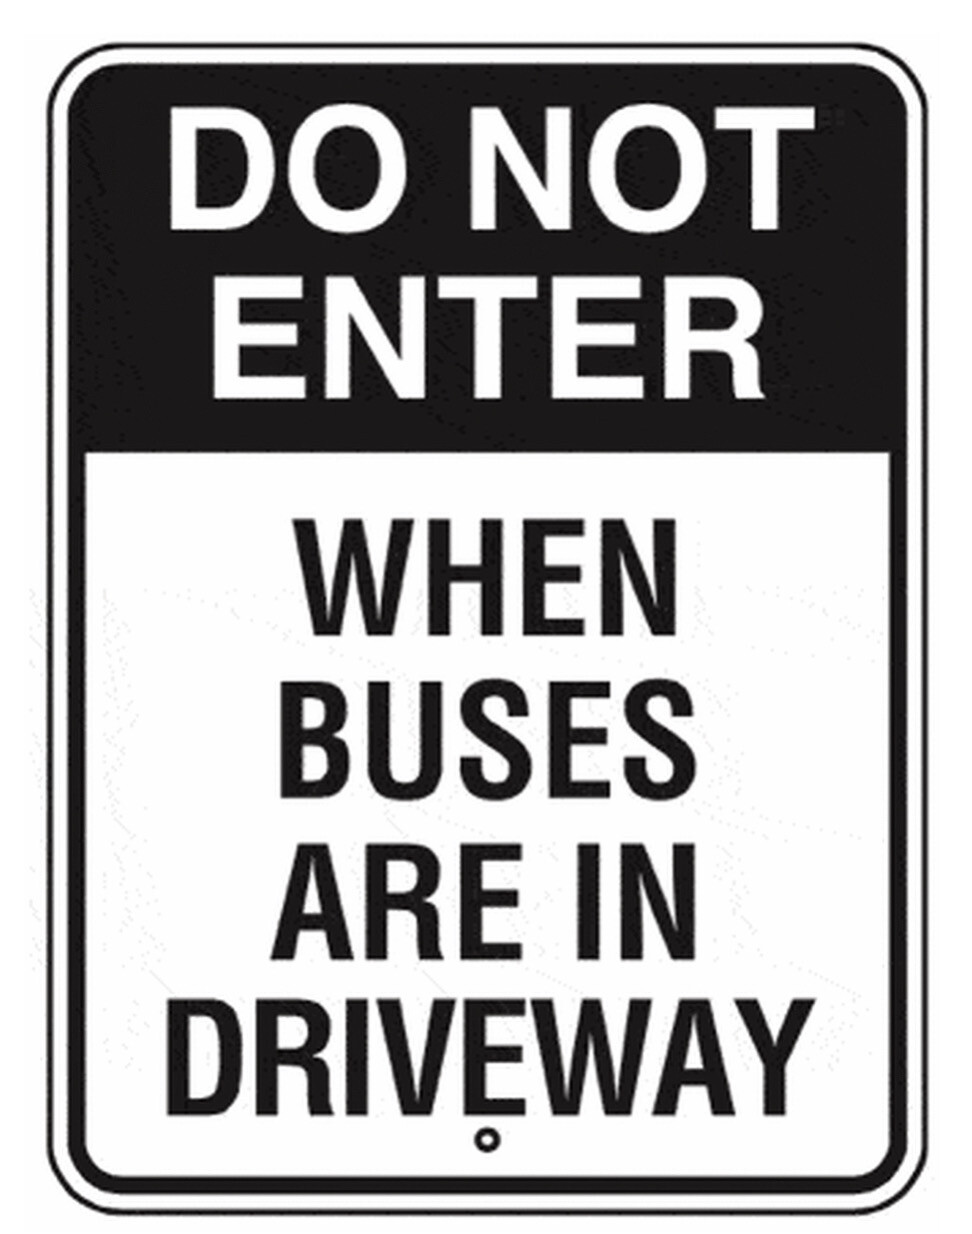 Do Not Enter Buses When In Driveway 18 x 24